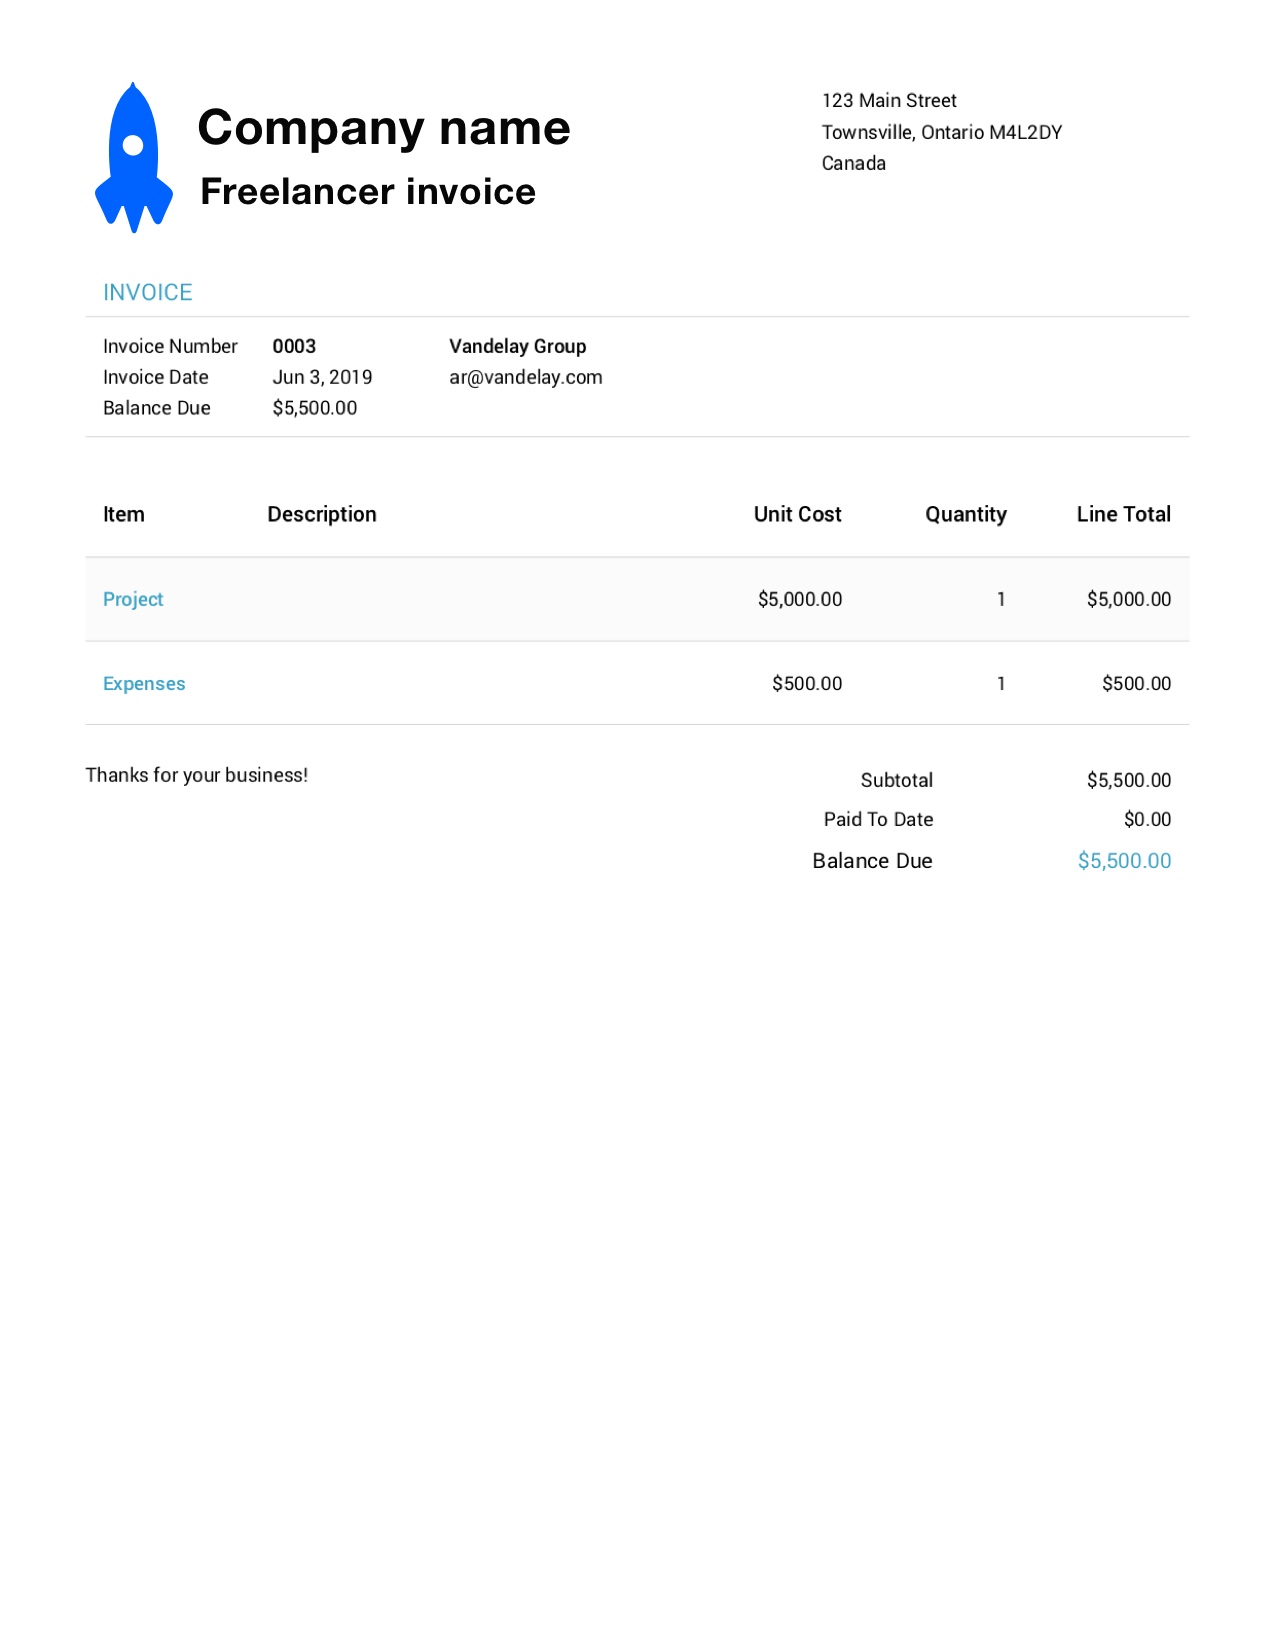 Free Freelance Invoice Template. Customize and Send in 90 Seconds